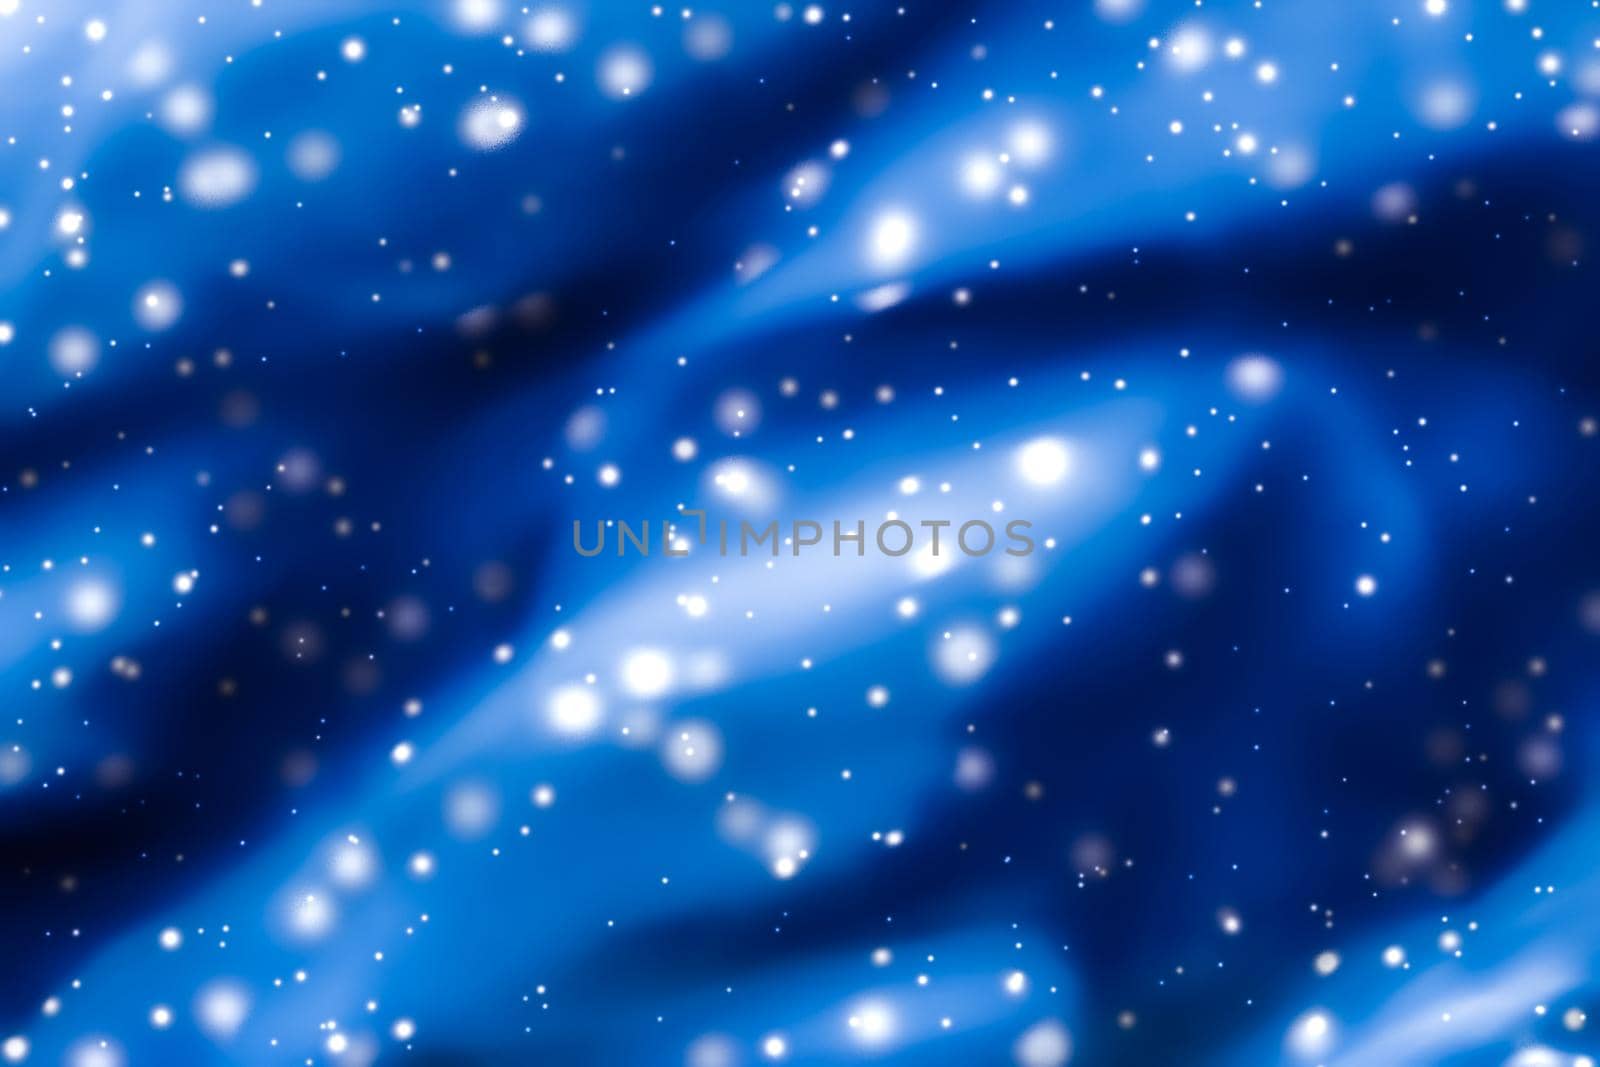 Branding, magic and festive concept - Christmas, New Years and Valentines Day blue abstract background, holidays card design, shiny snow glitter as winter season sale backdrop for luxury beauty brand